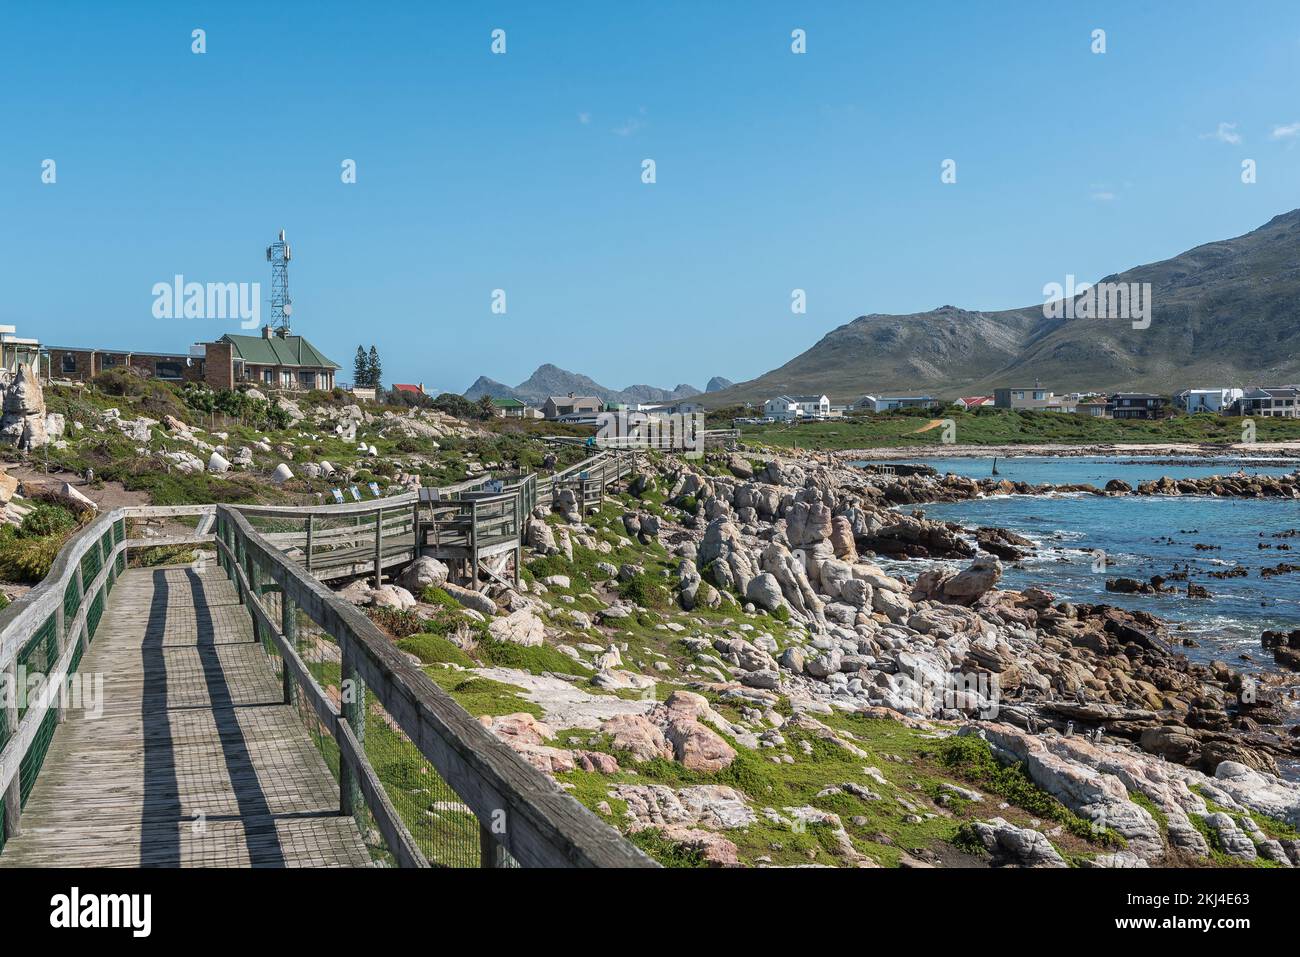 Bettys Bay, South Africa - Sep 20, 2022: The boardwalk at Stony Point Nature Reserve in Bettys Bay. Cape Penguins are visible Stock Photo